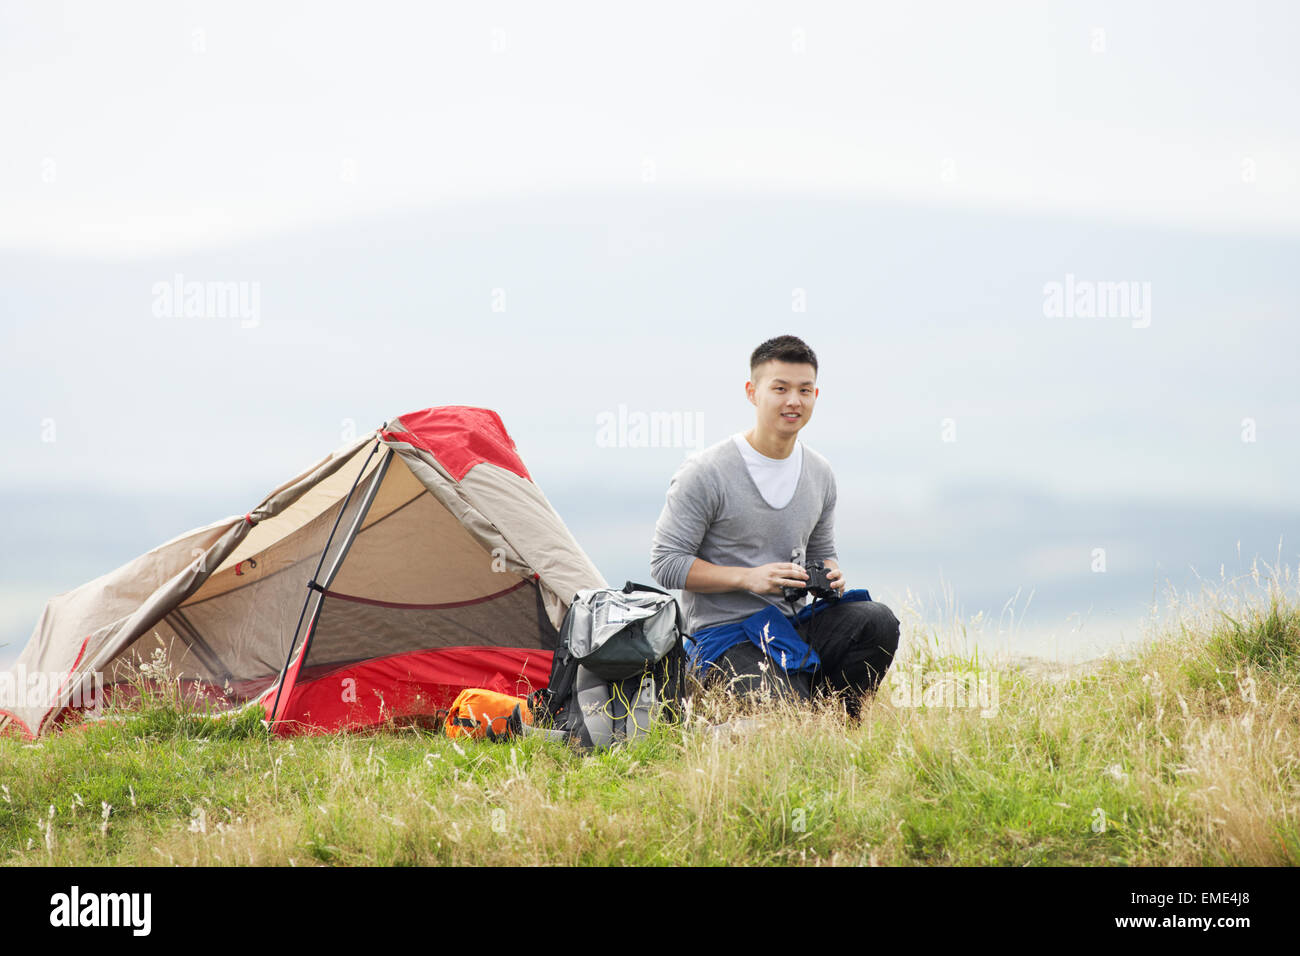 Young Man On Camping Trip In Countryside Stock Photo